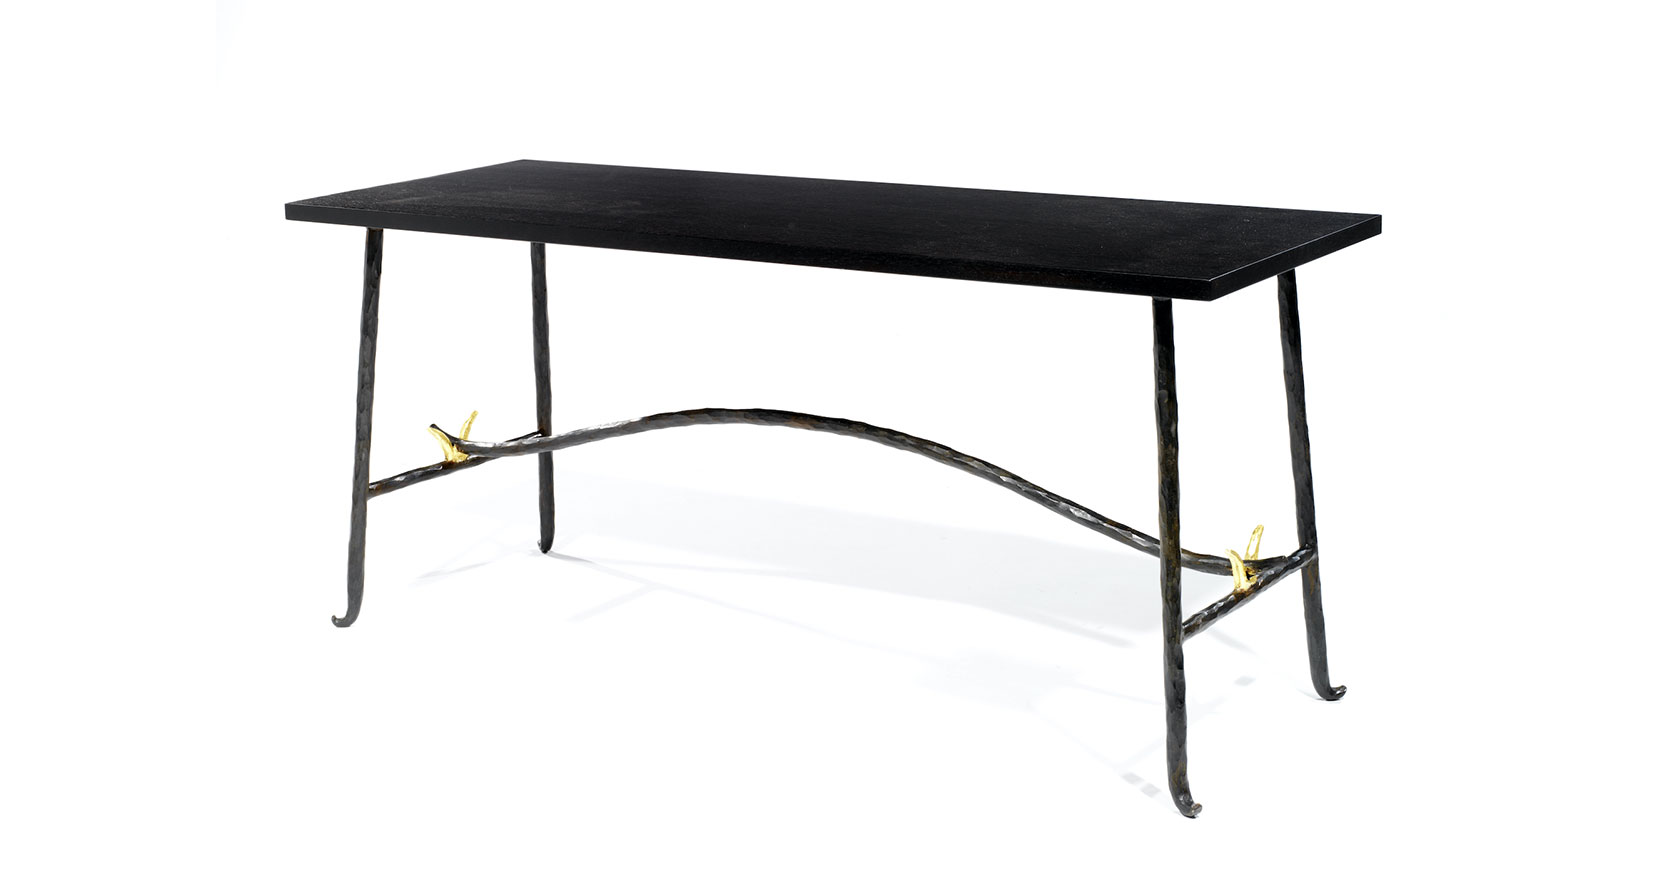 Garouste Bonetti, minimalist low table, black wrought iron legs slightly curved at the bottom, with two small golden ornaments with the shape of V, dark brown wooden top